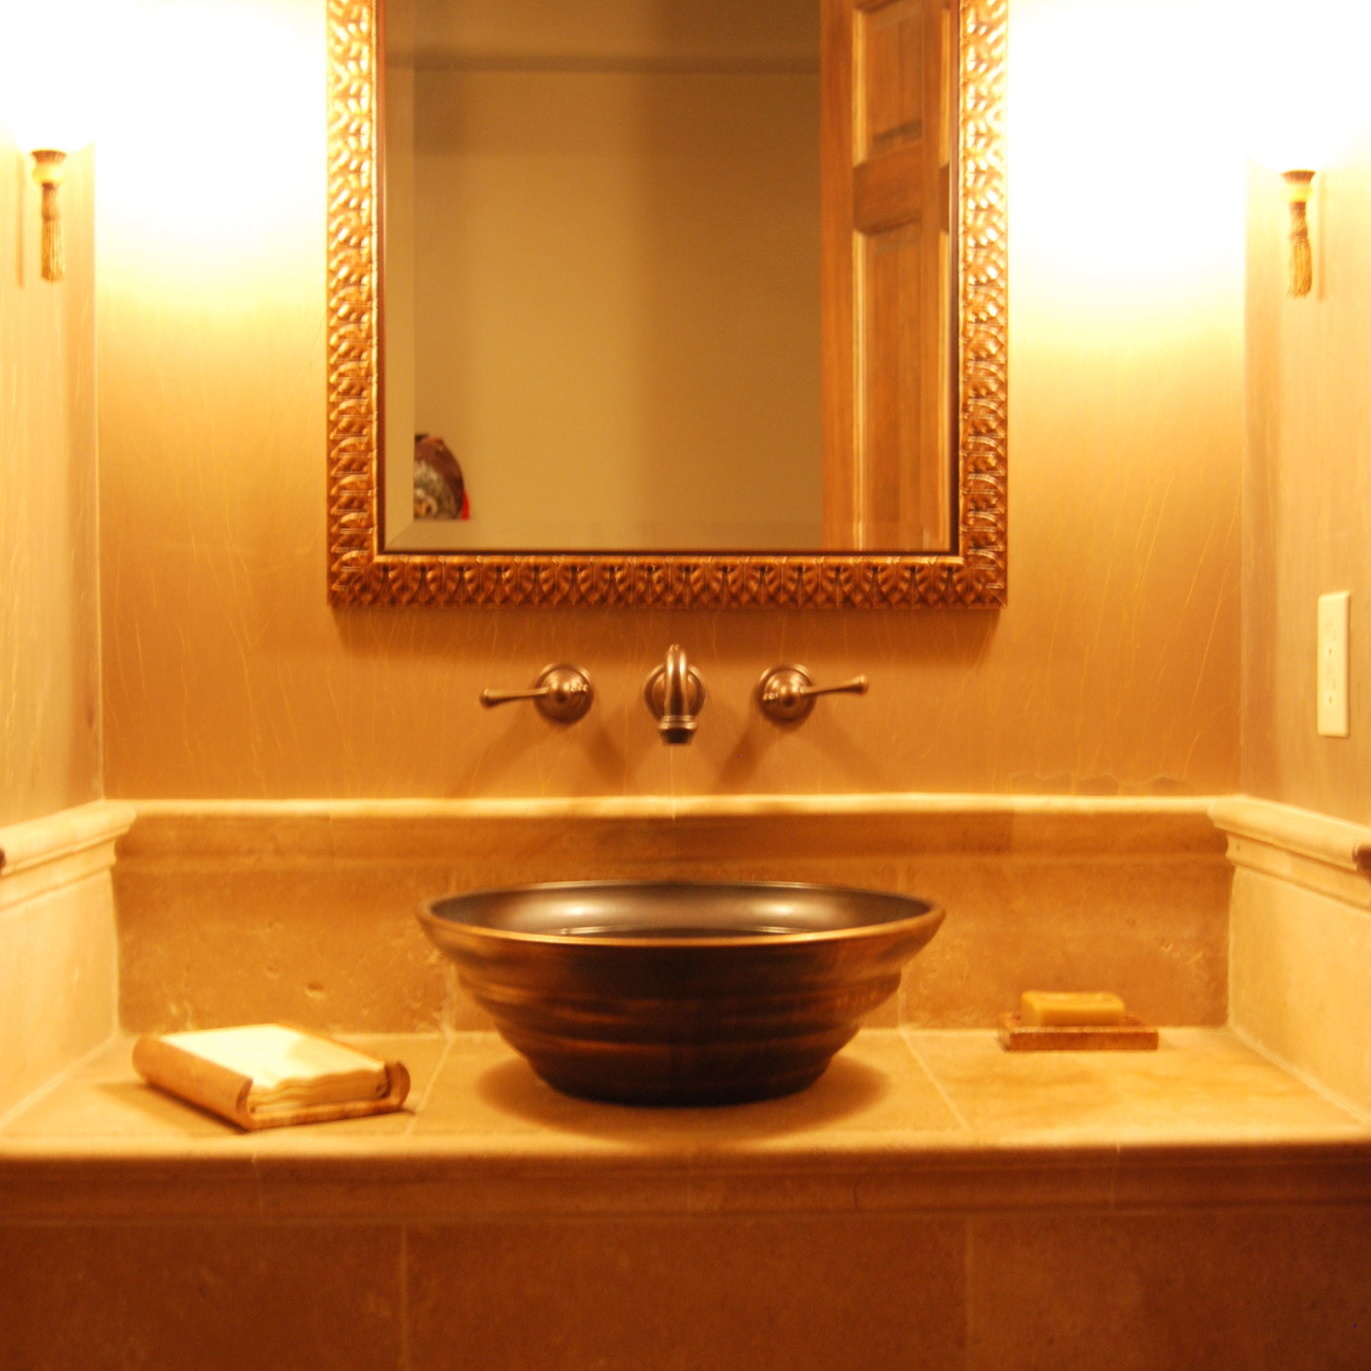 New bathroom sink with ornate gold mirror